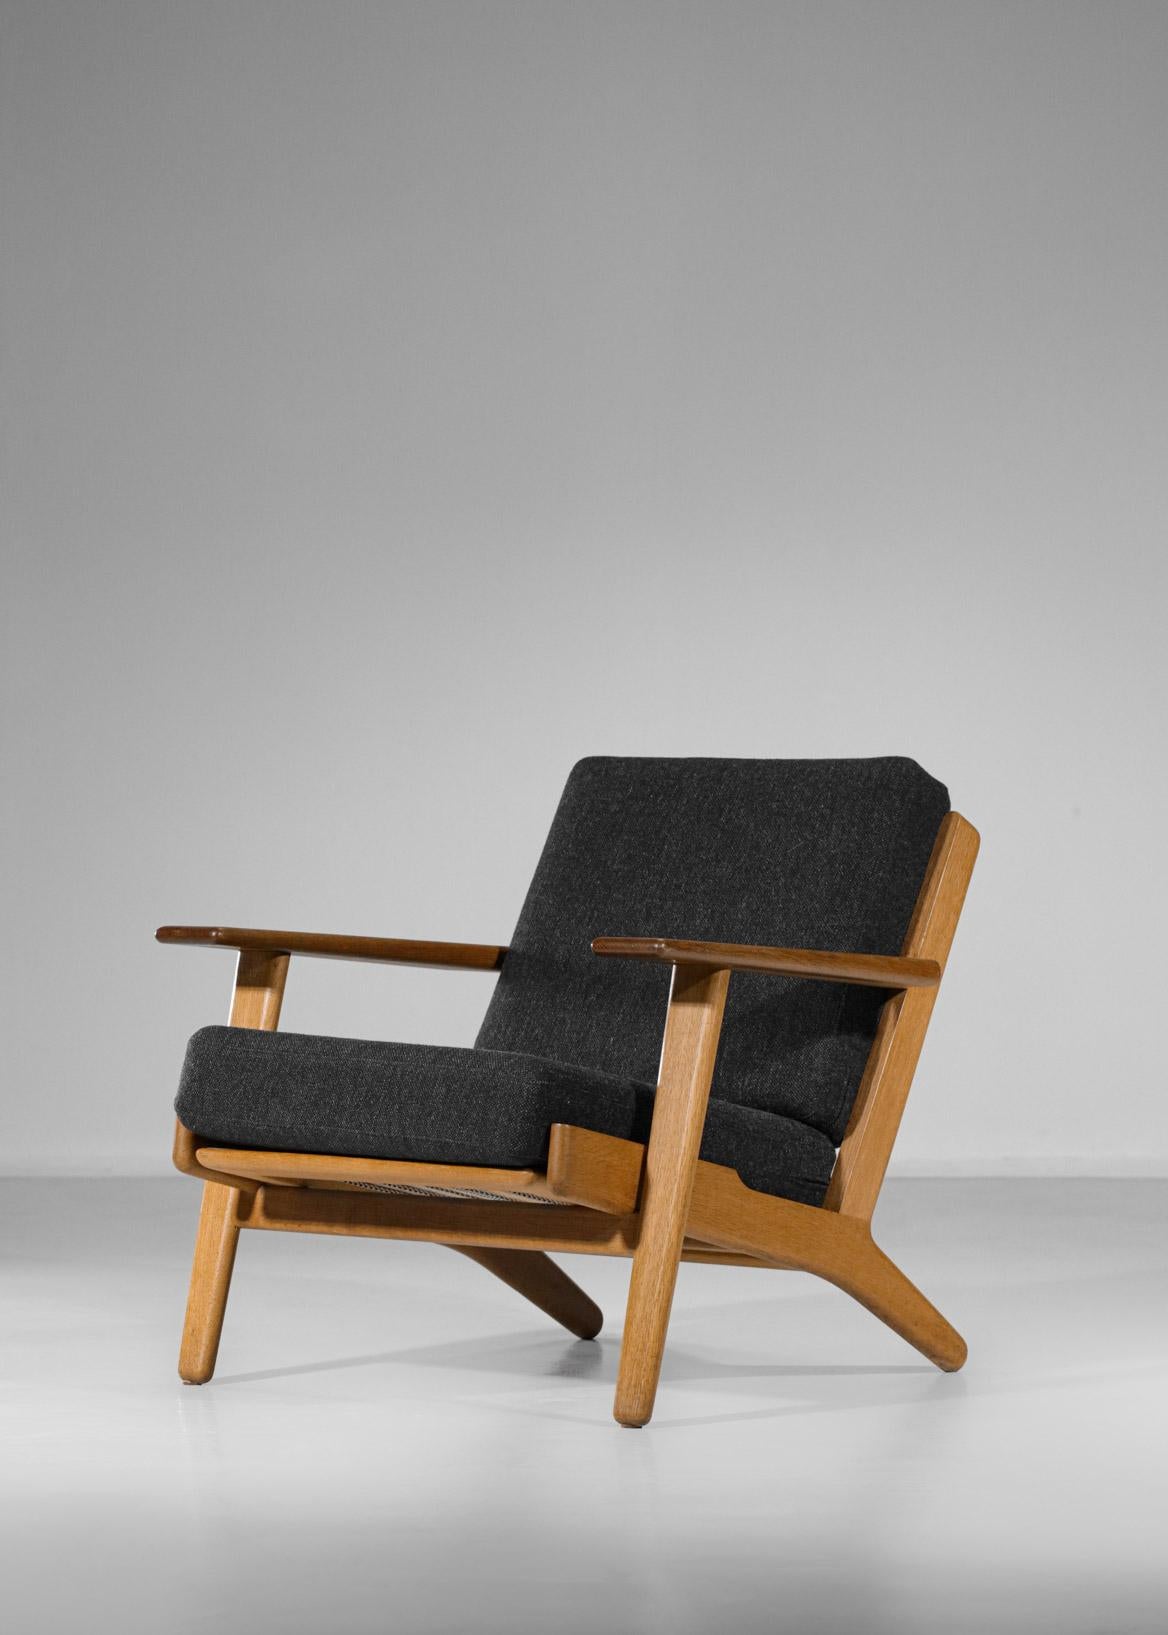 Scandinavian armchair GE 290 by the famous designer Hans Werner from 1953 published by GETAMA. Solid oak frame with sloping legs and a backrest that slopes slightly backwards for perfect seating. Original cushions reupholstered. Excellent vintage